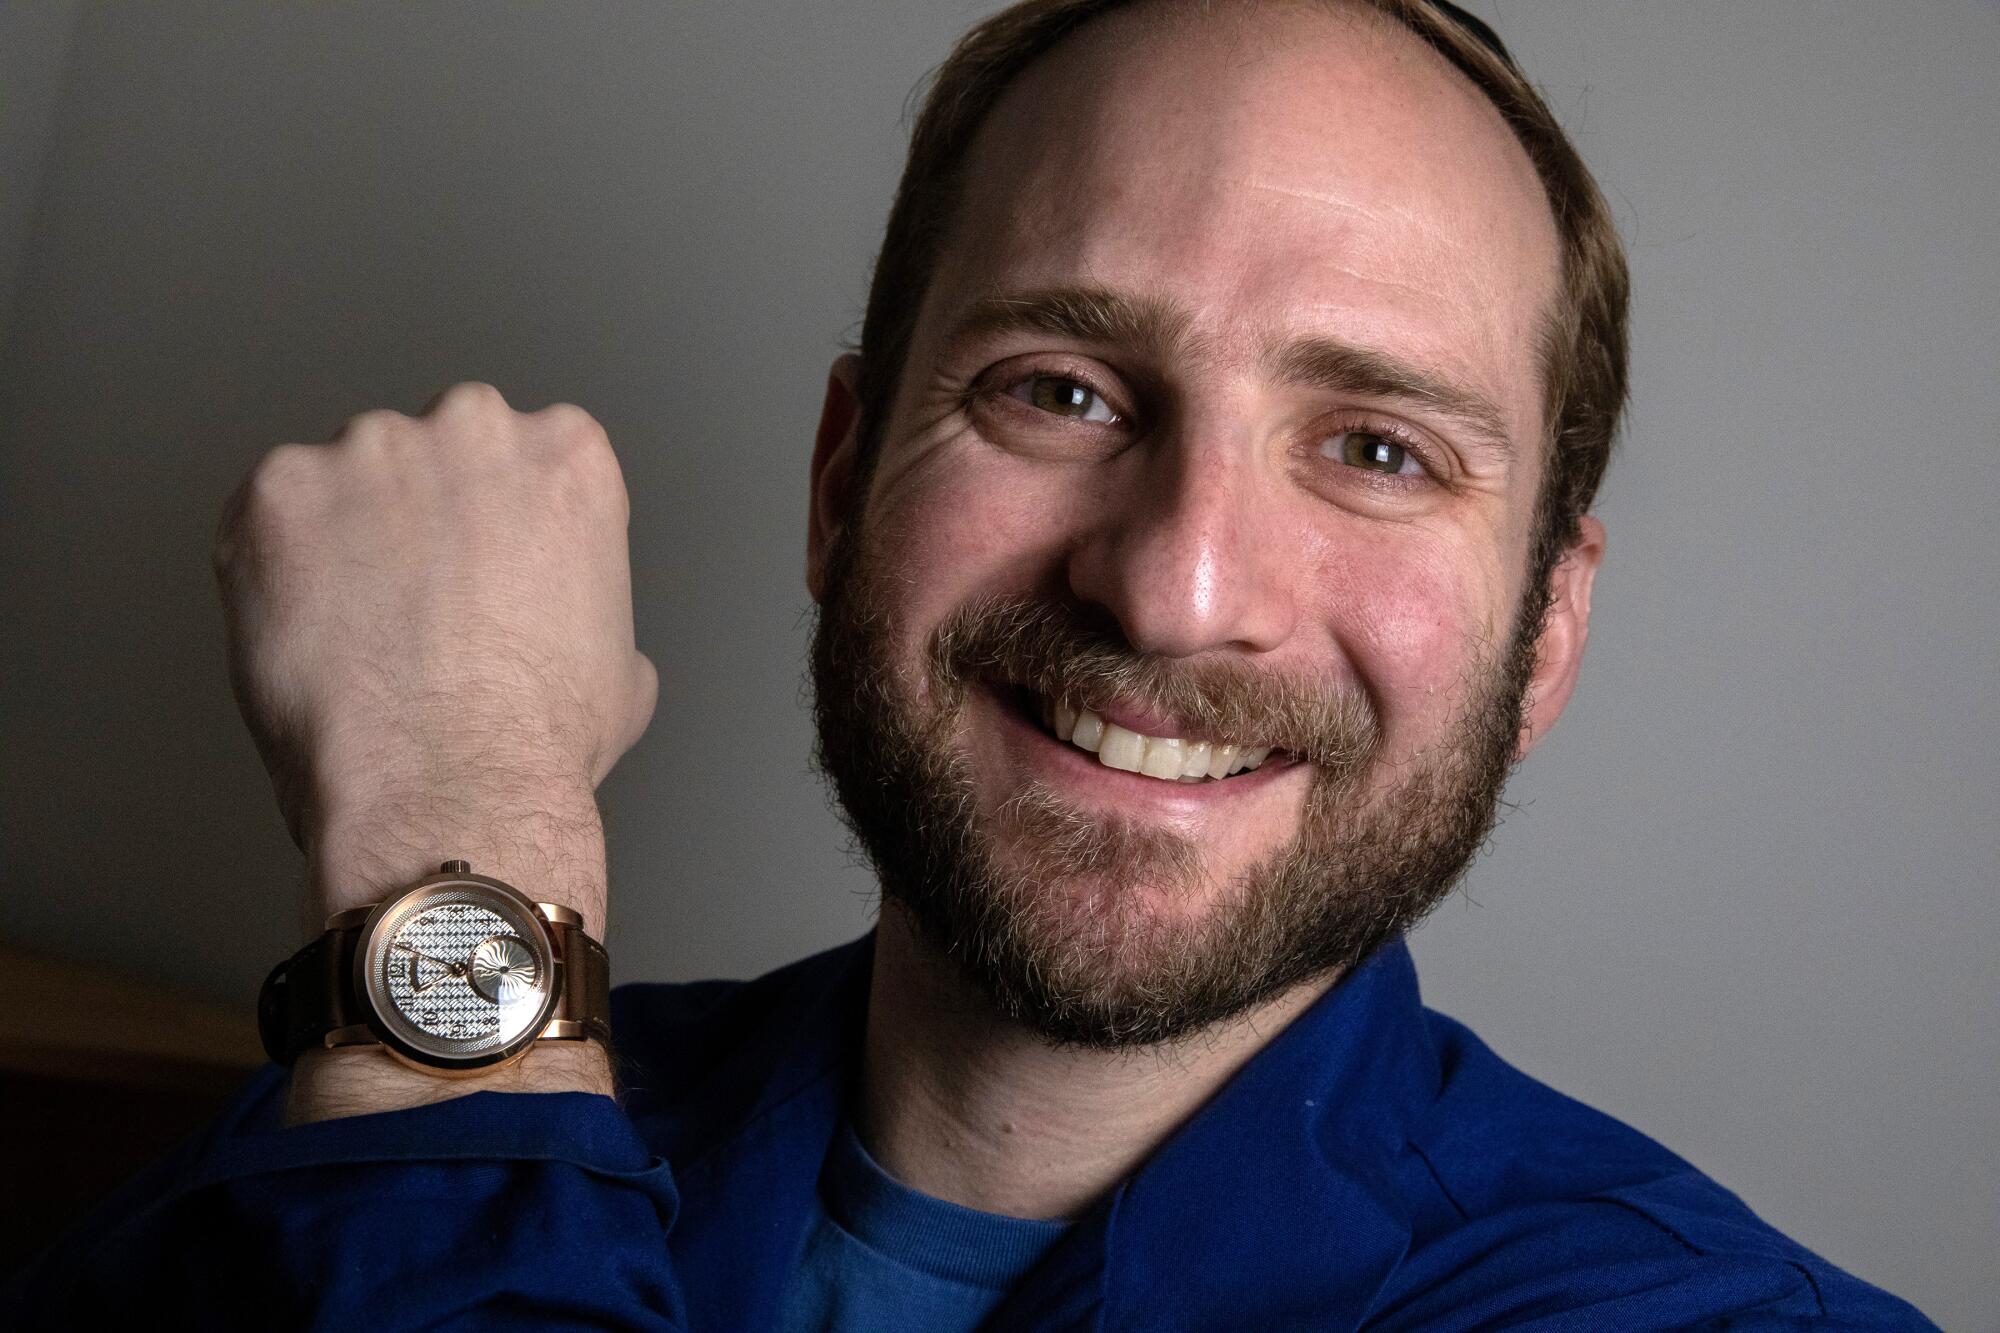 L.A. watchmaker Joshua Shapiro and the prototype of his new U.S.-made watch.